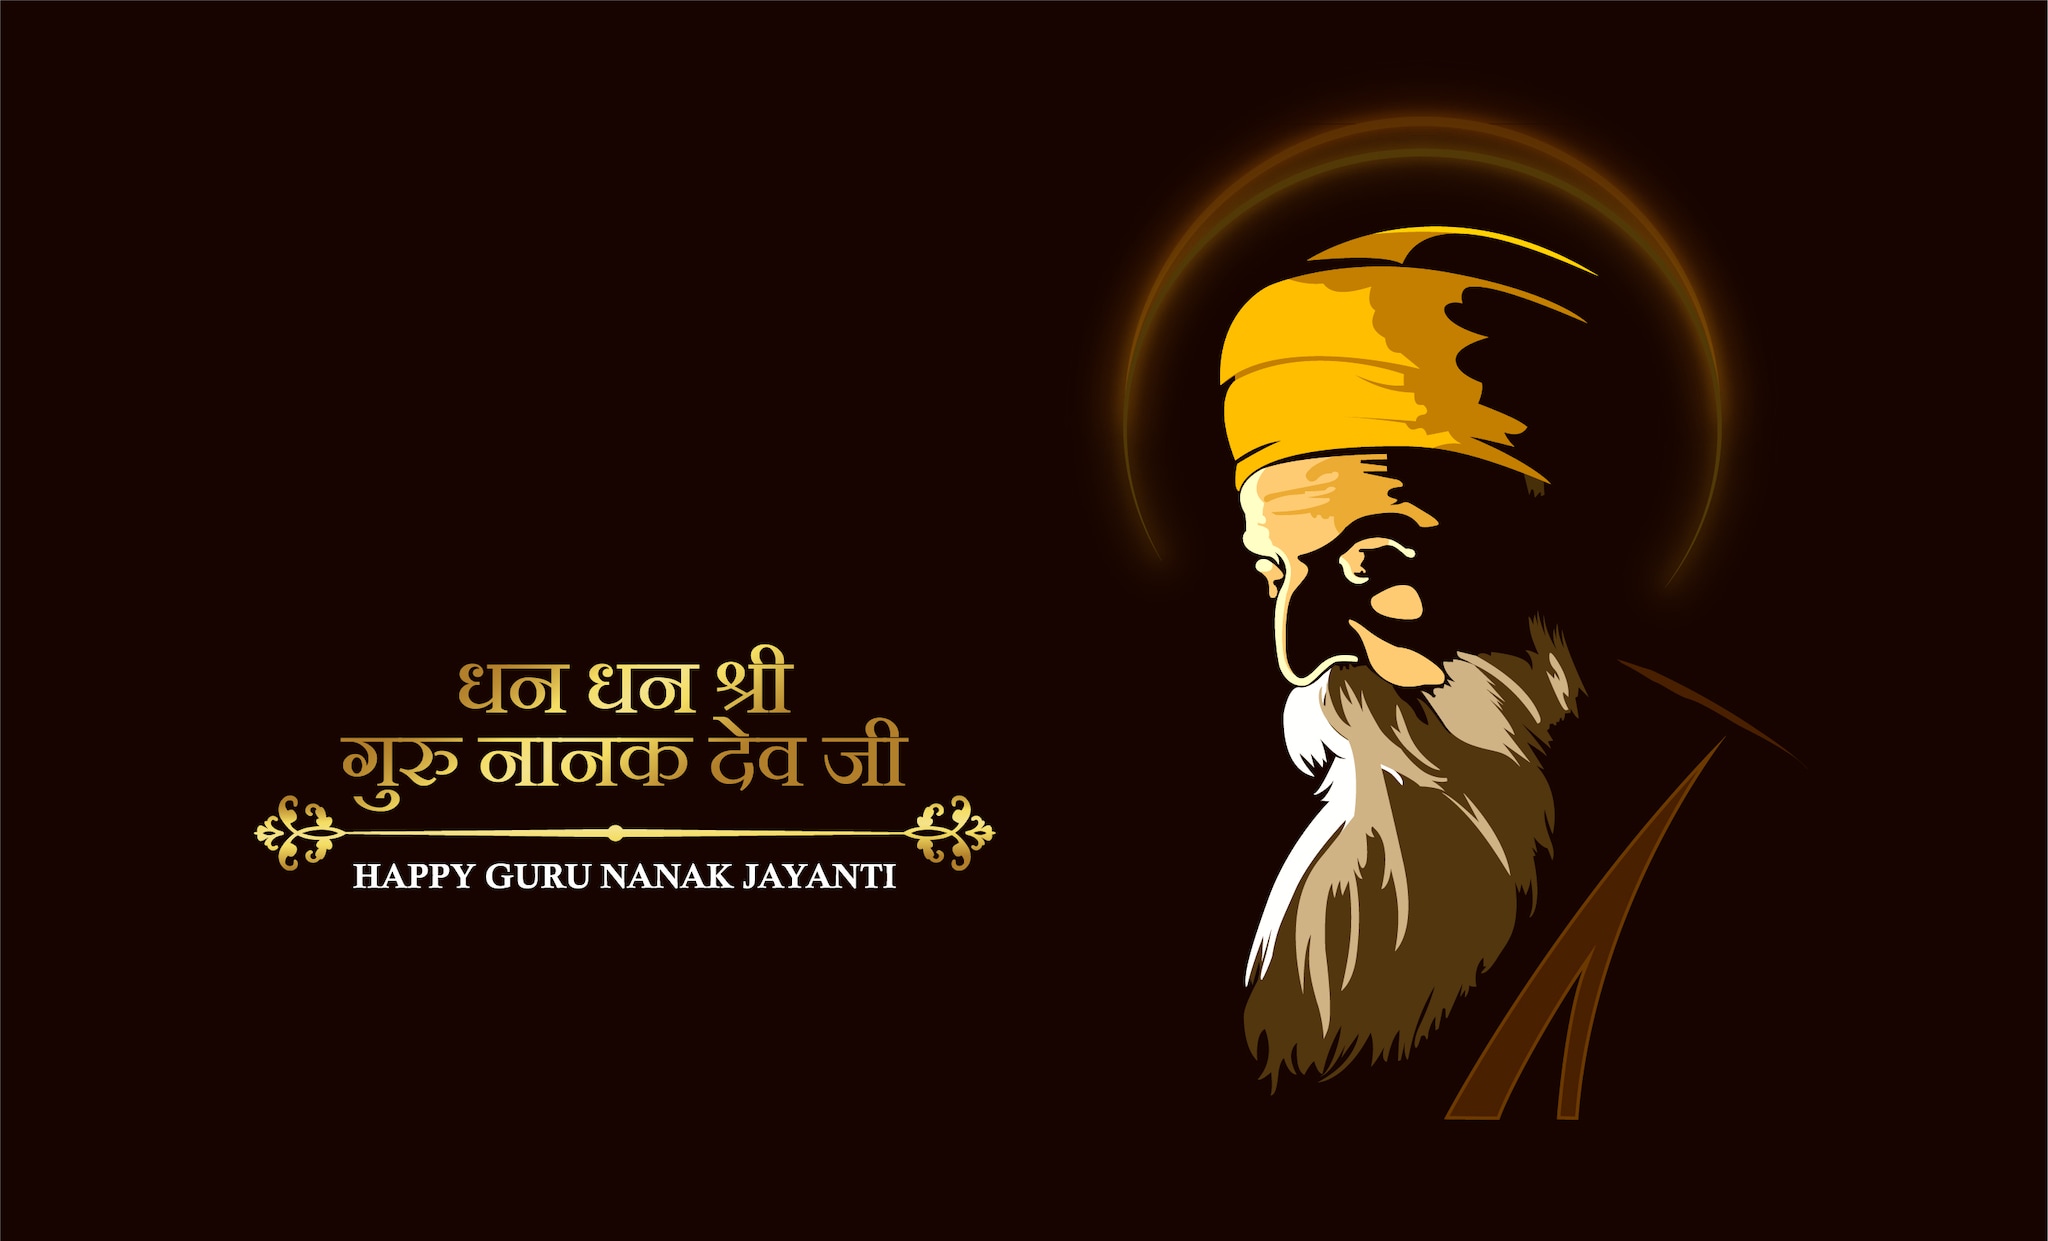 Happy Guru Nanak Jayanti 2021: Wishes Images, Quotes, Photos, Photos, Facebook SMS and Messages. (Image: Shutterstock)